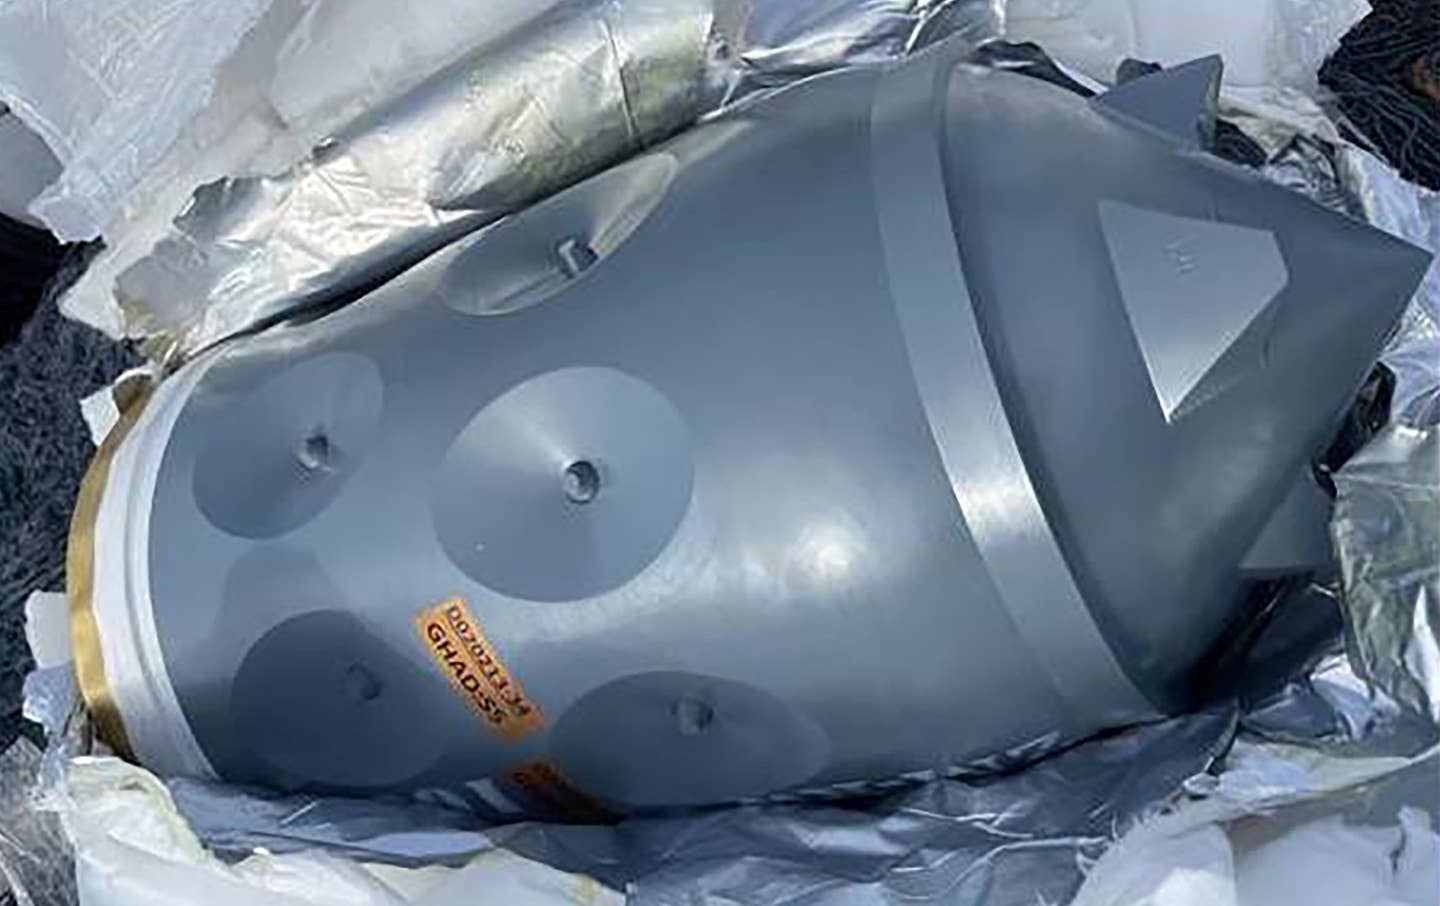 A close-up of the warhead. A label with "GHAD-55" or "GHAD-5S" written on it, as well as what appears to be a serial number, is visible. <em>CENTCOM</em>